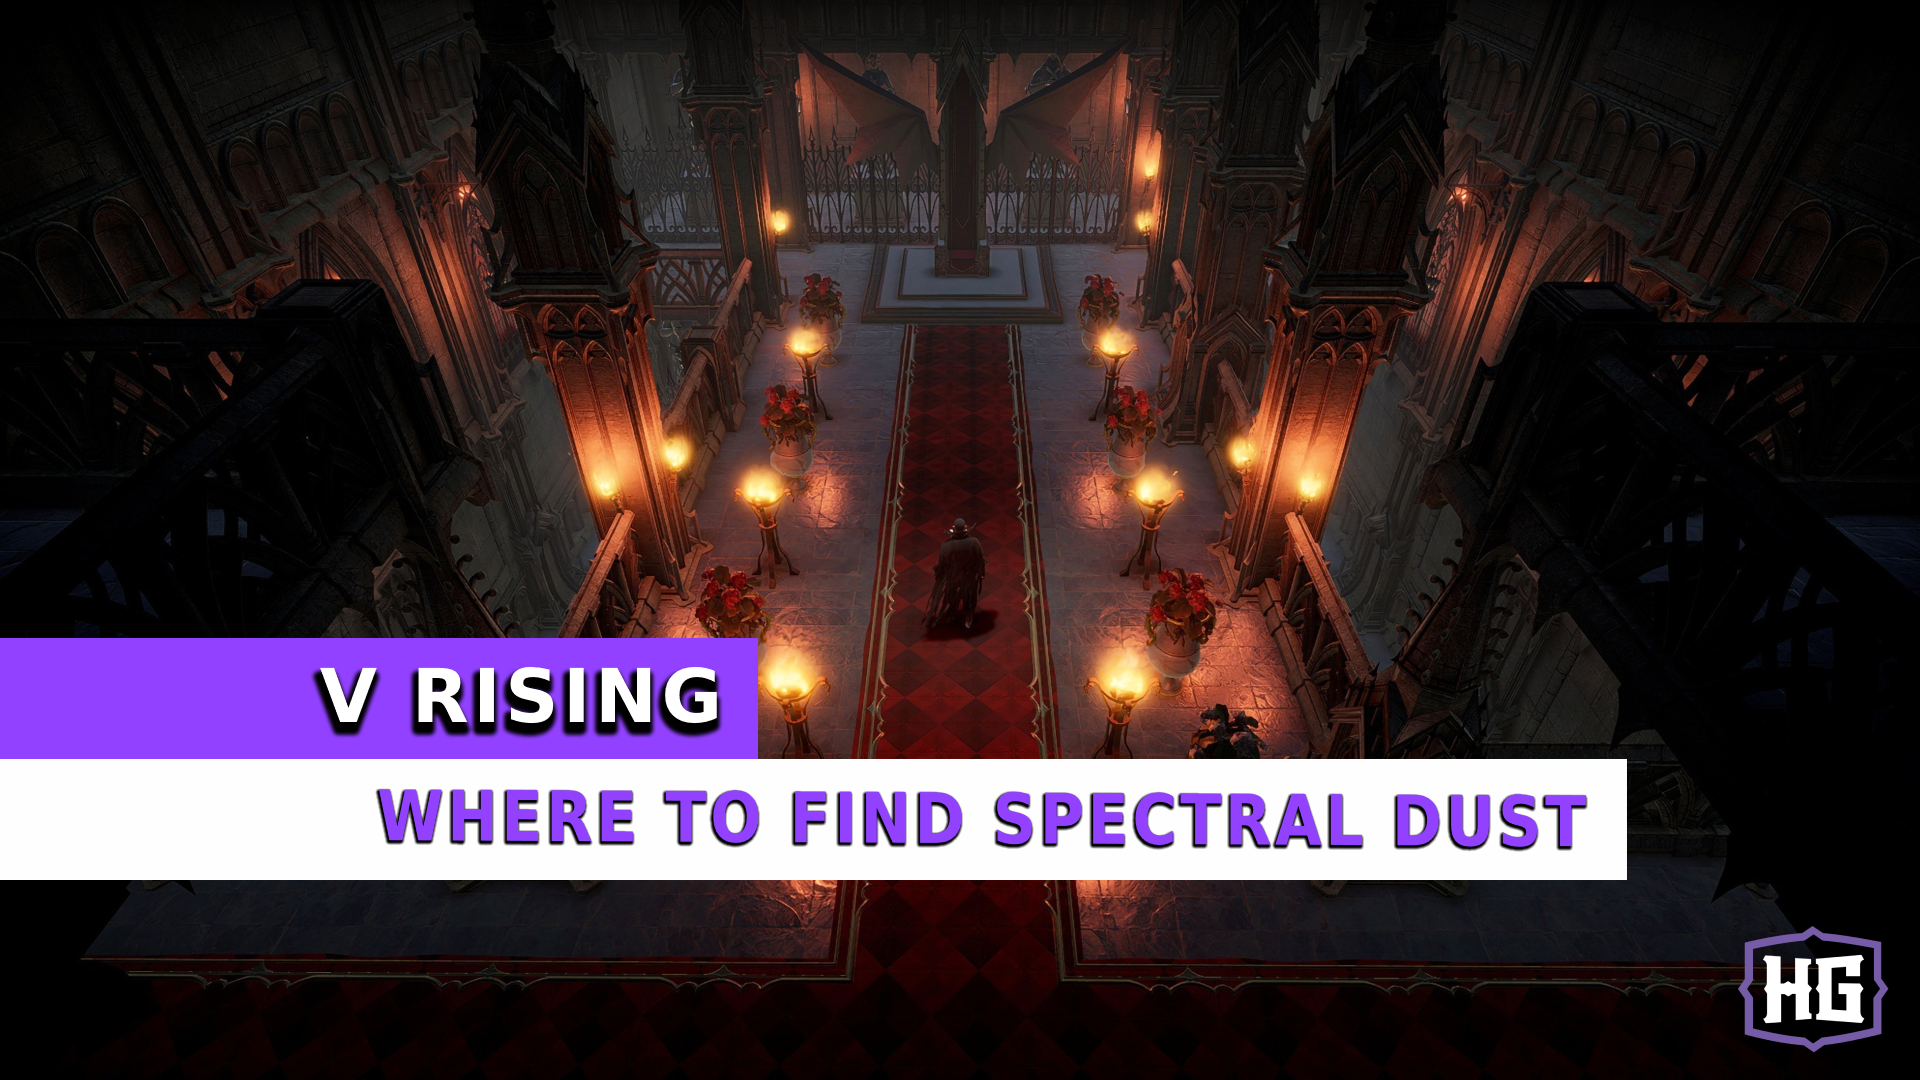 V Rising: Where to Find Spectral Dust